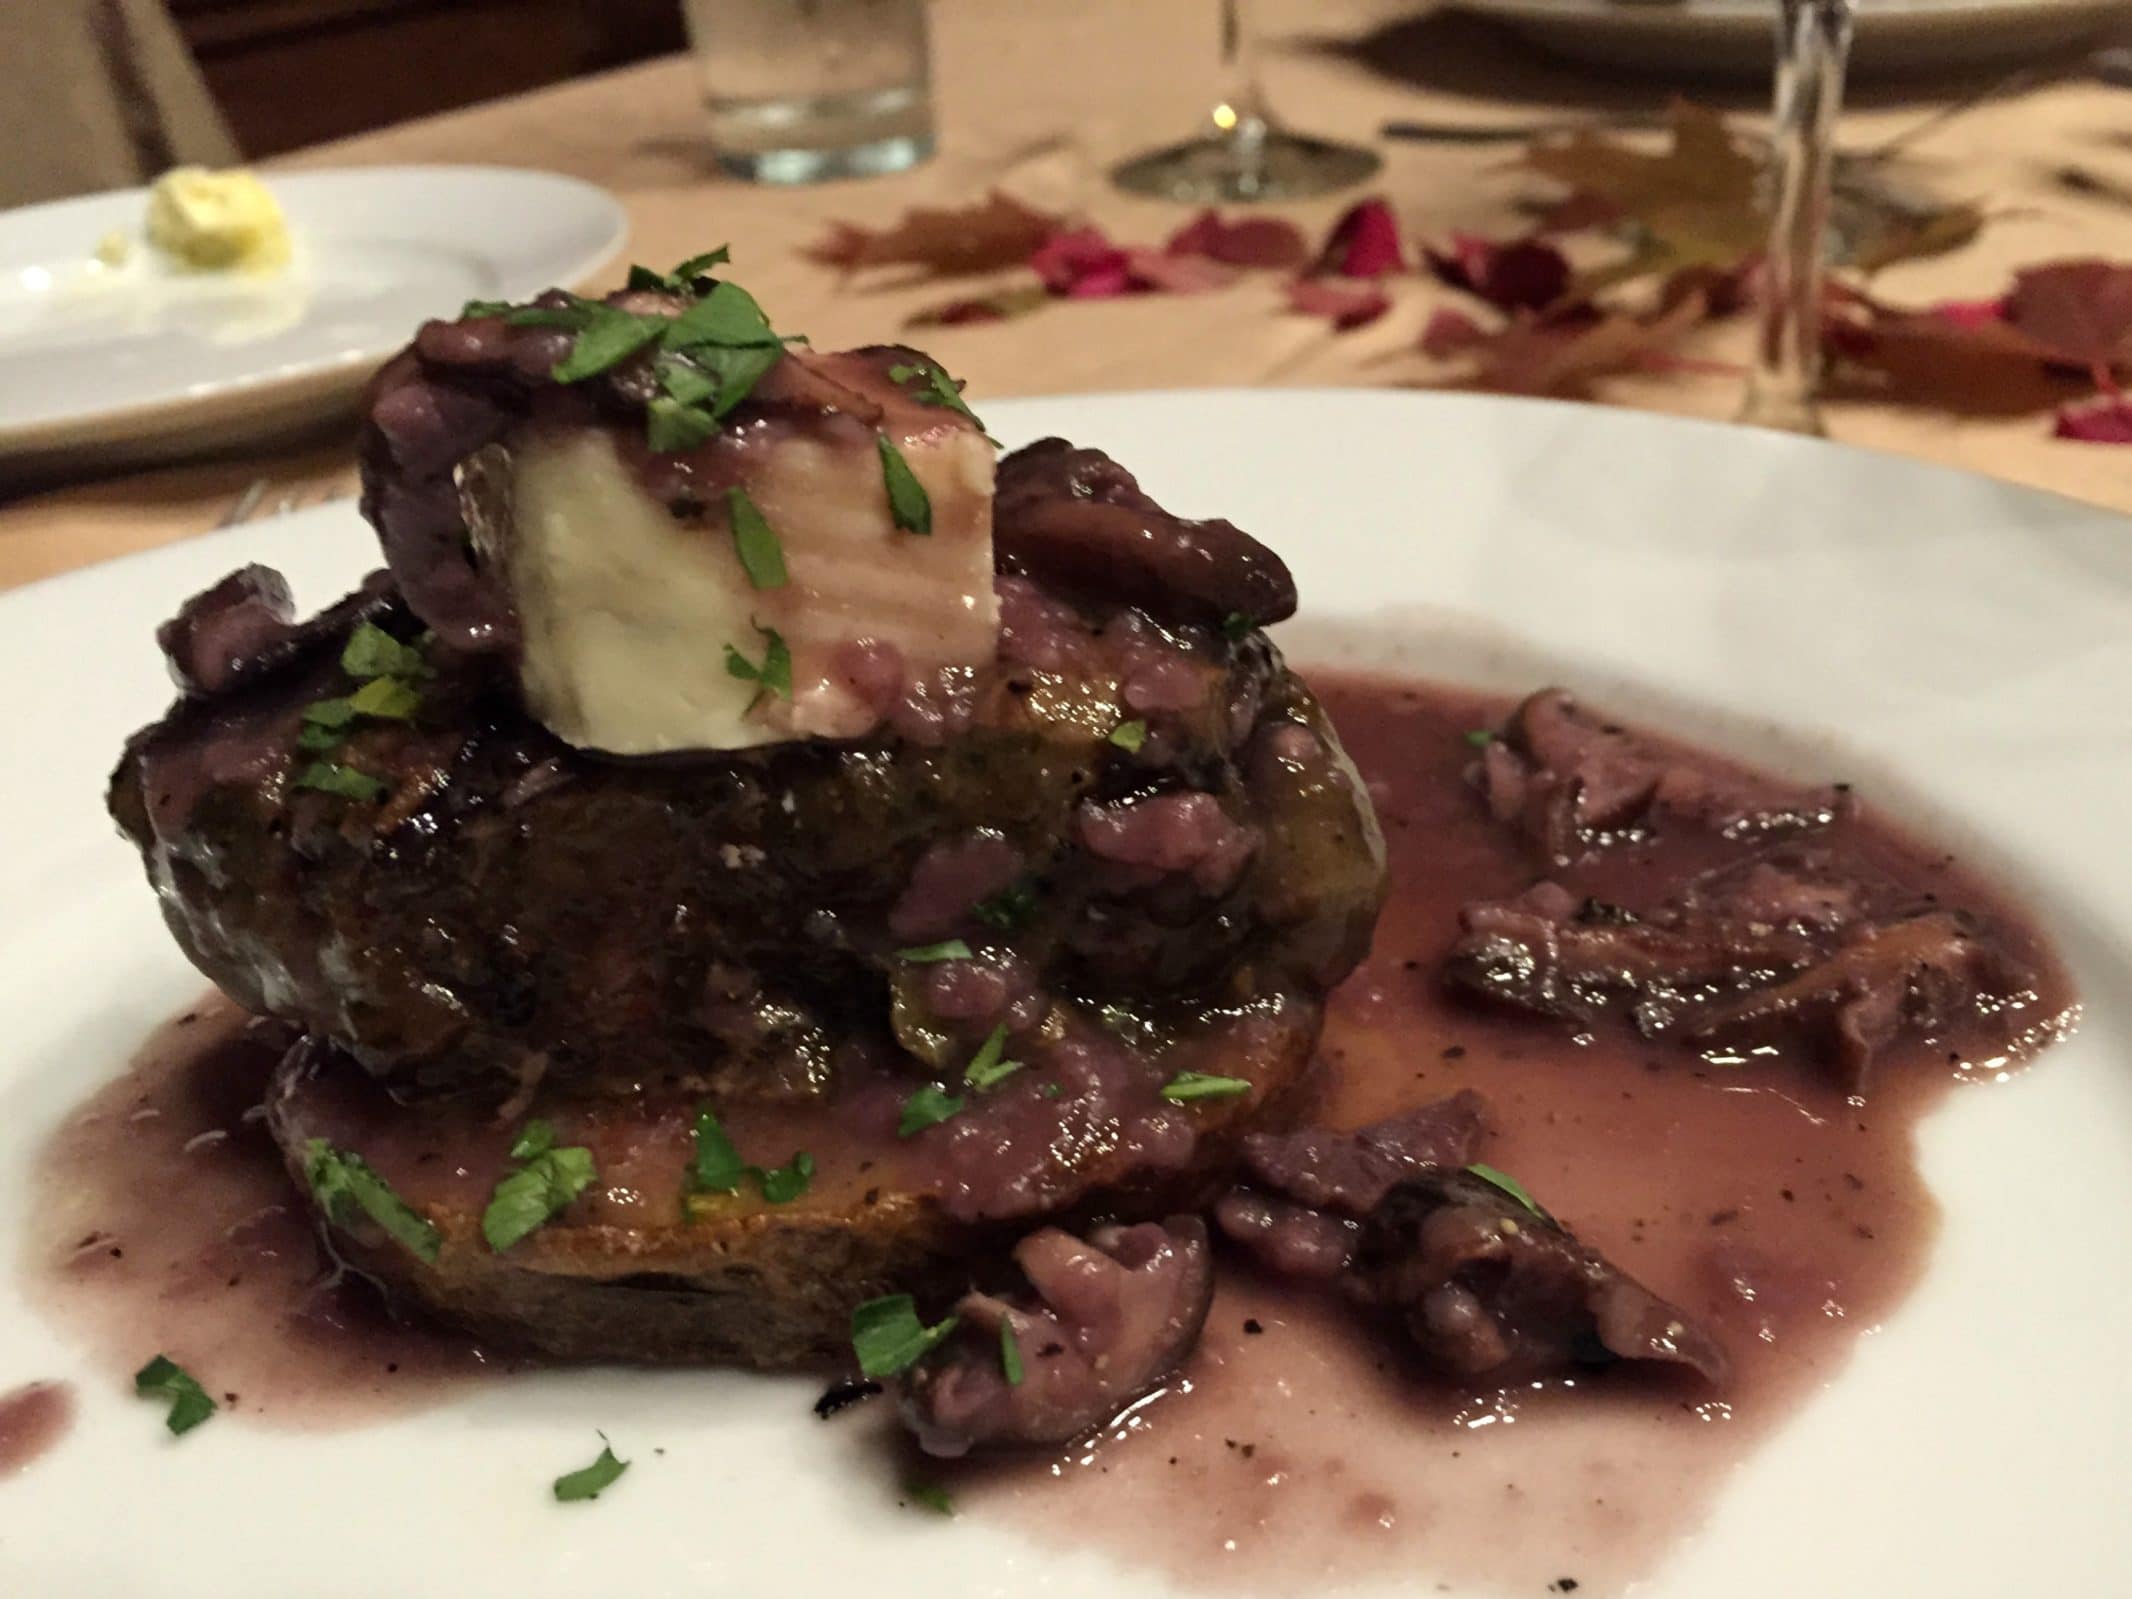 The paired course wine dinner featured beef shoulder with red wine, shiitake mushroom and gorgonzola reduction.